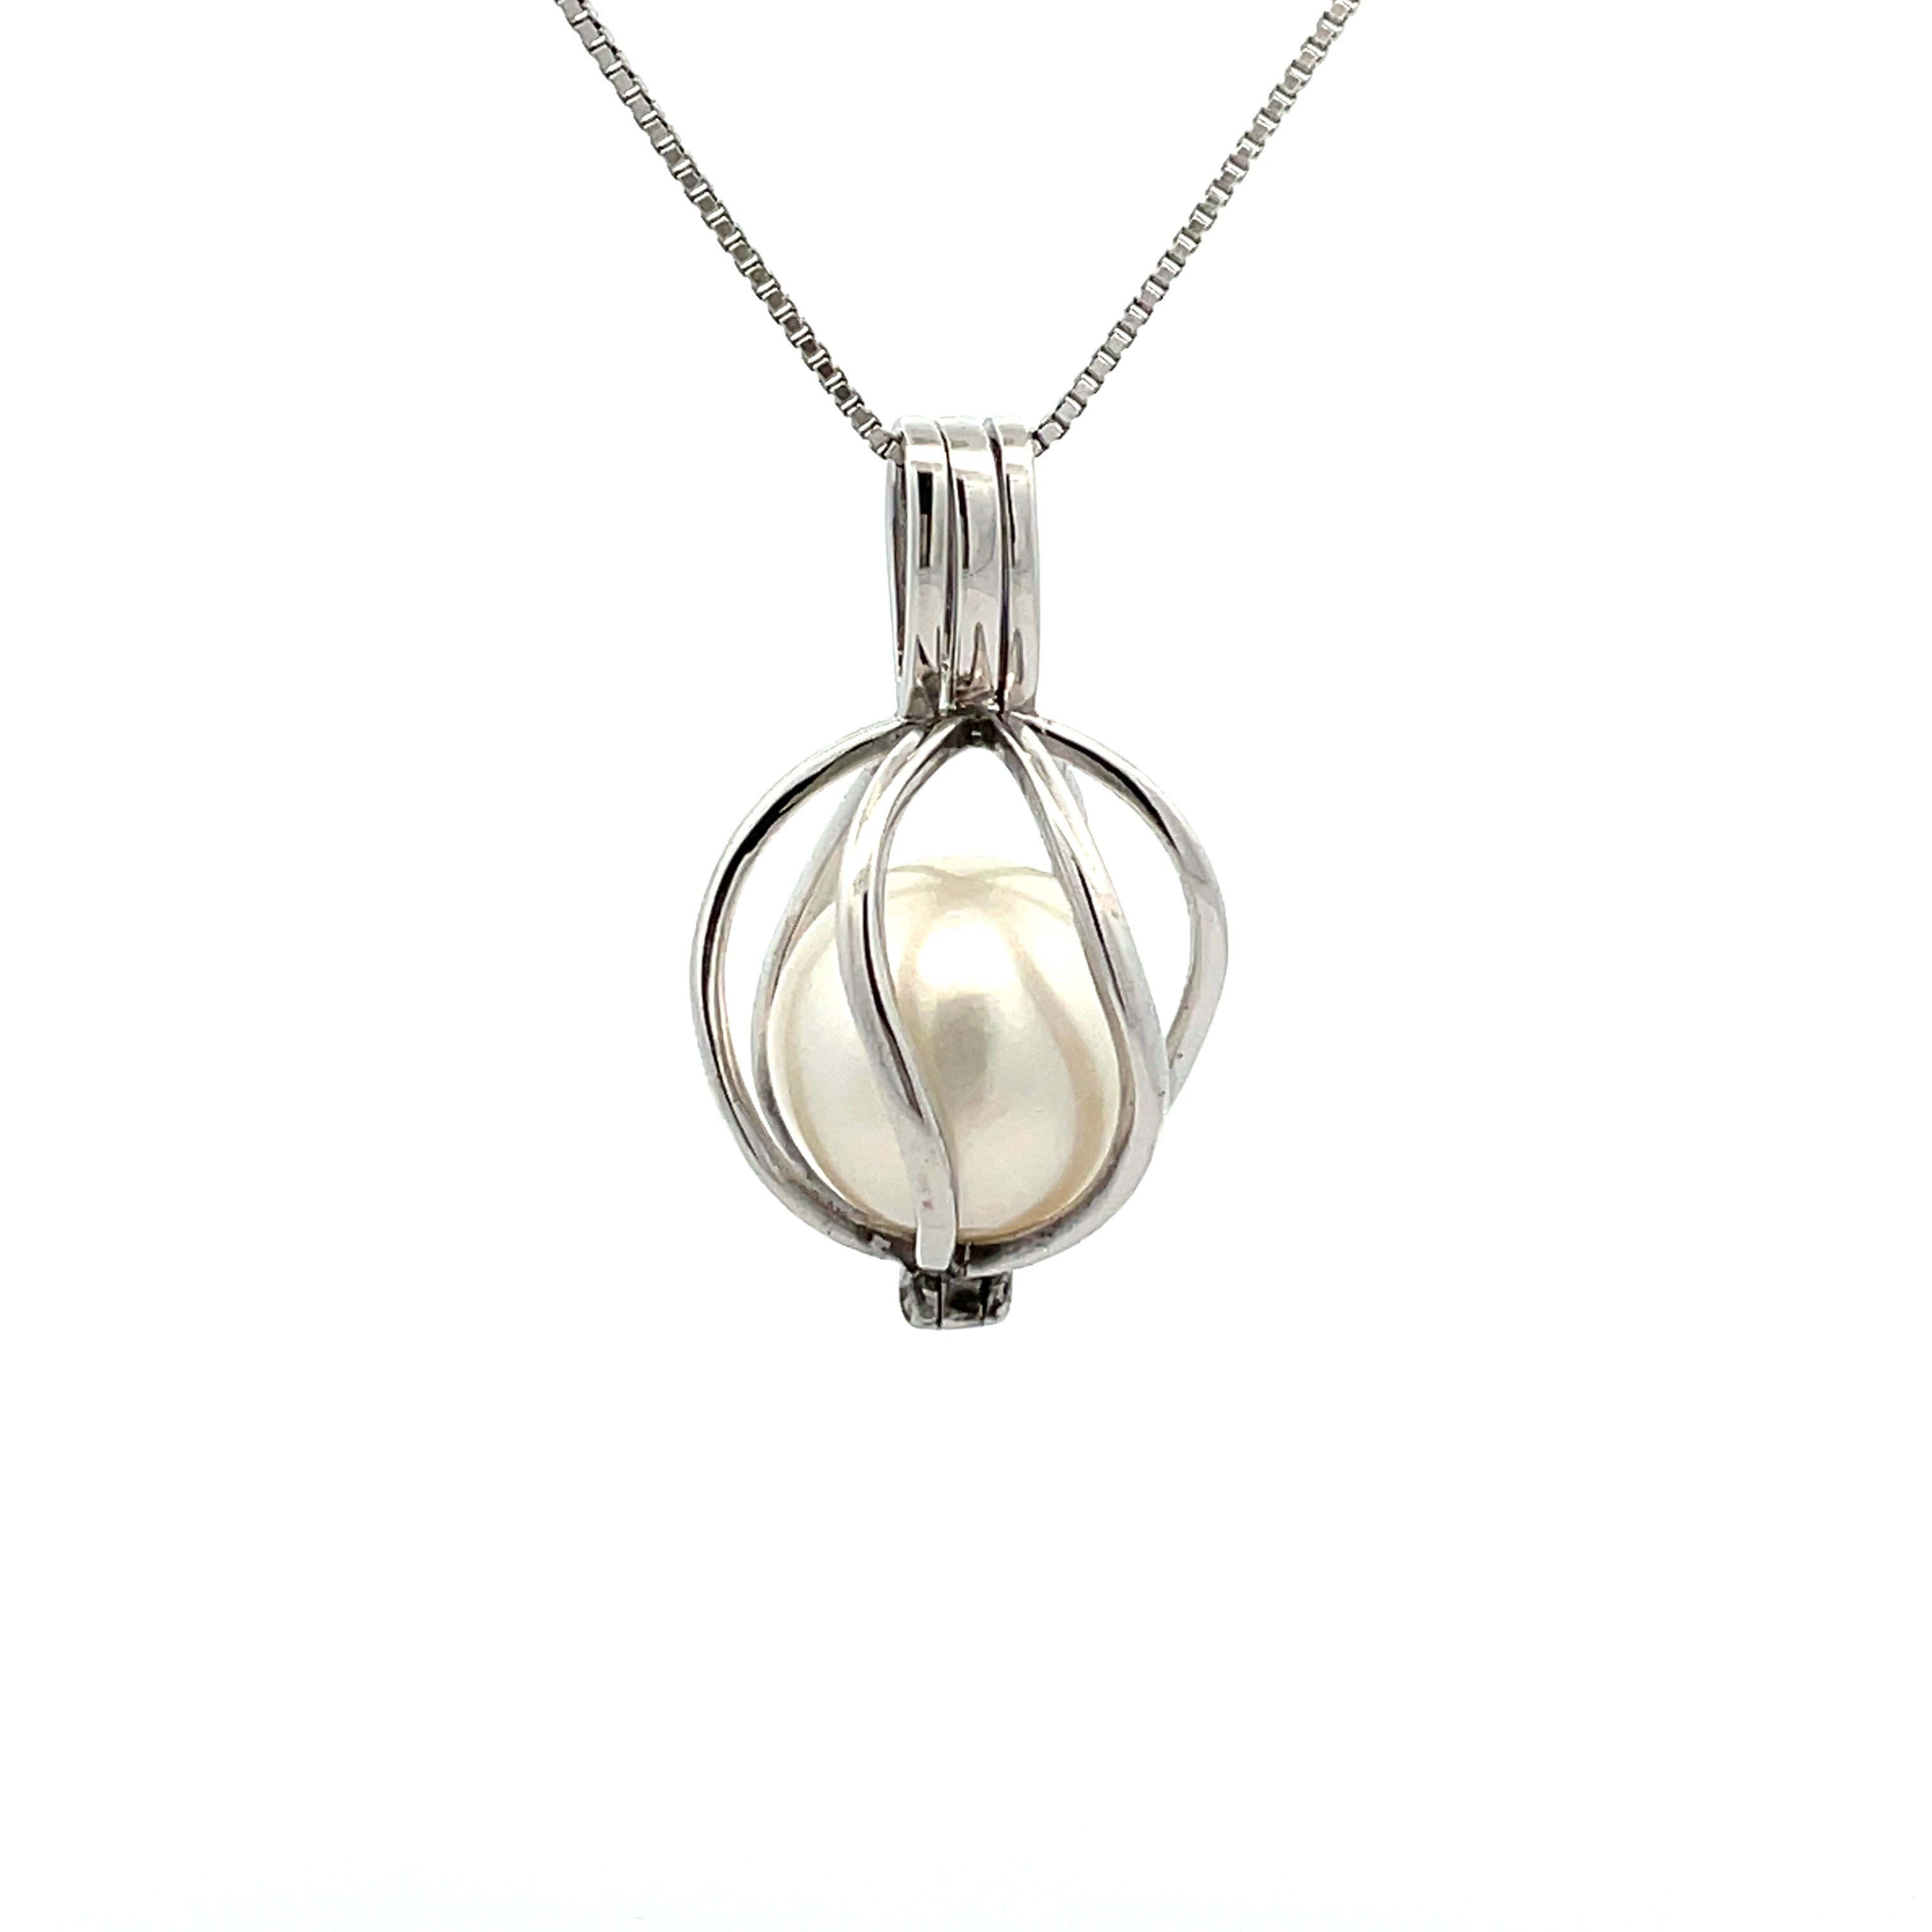 Buy Vintage Caged Faux Pearl Pendant Necklace 8425 15 Silver Tone Chain  Online in India - Etsy